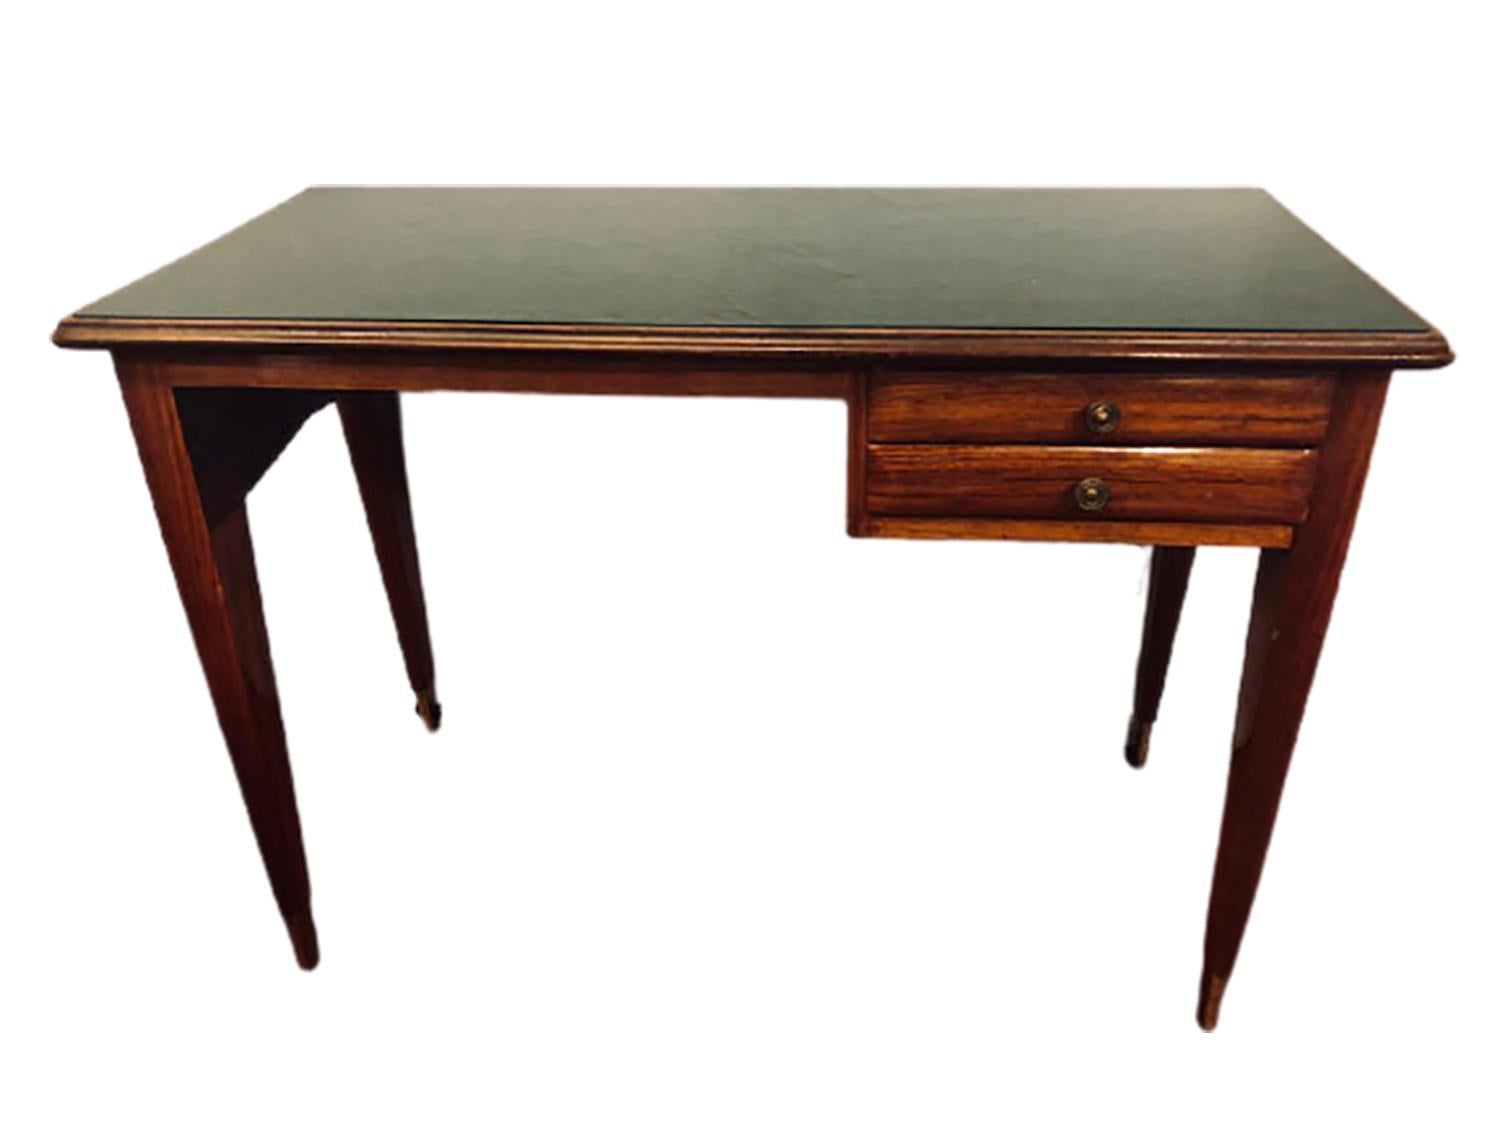 Mid-Century Modern writing table in rosewood with a green glass top having two drawers and a knee hole opening this vanity or writing desk is a nice size to fit in most homes. The whole sits on bronze sabots and has recently been polished.